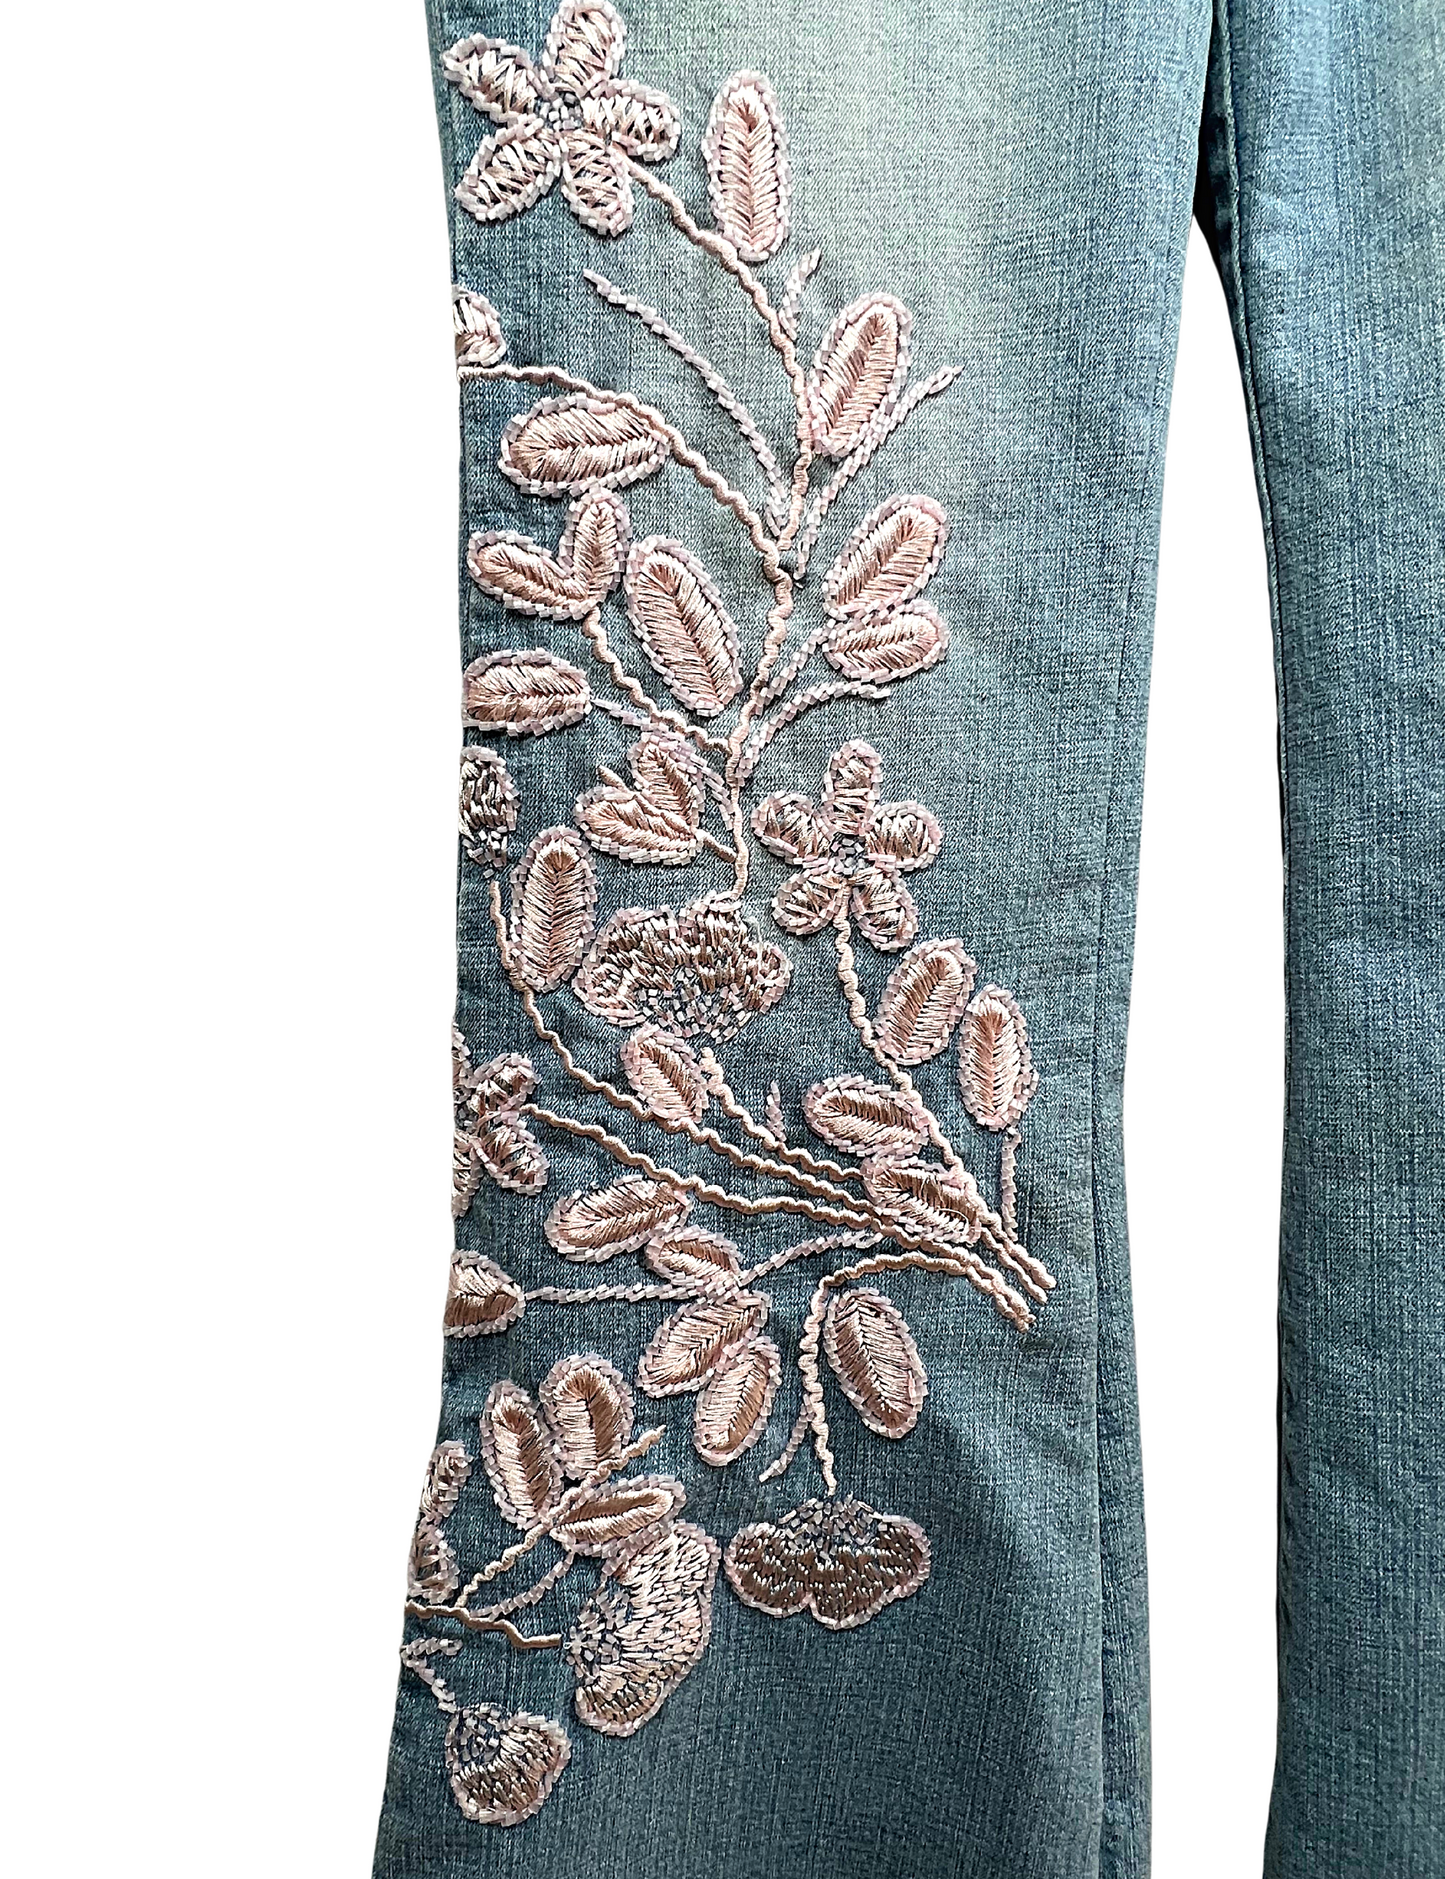 00’s Y2K Vanilla Star Pink Embroidery Floral Flare Low Rise Jeans